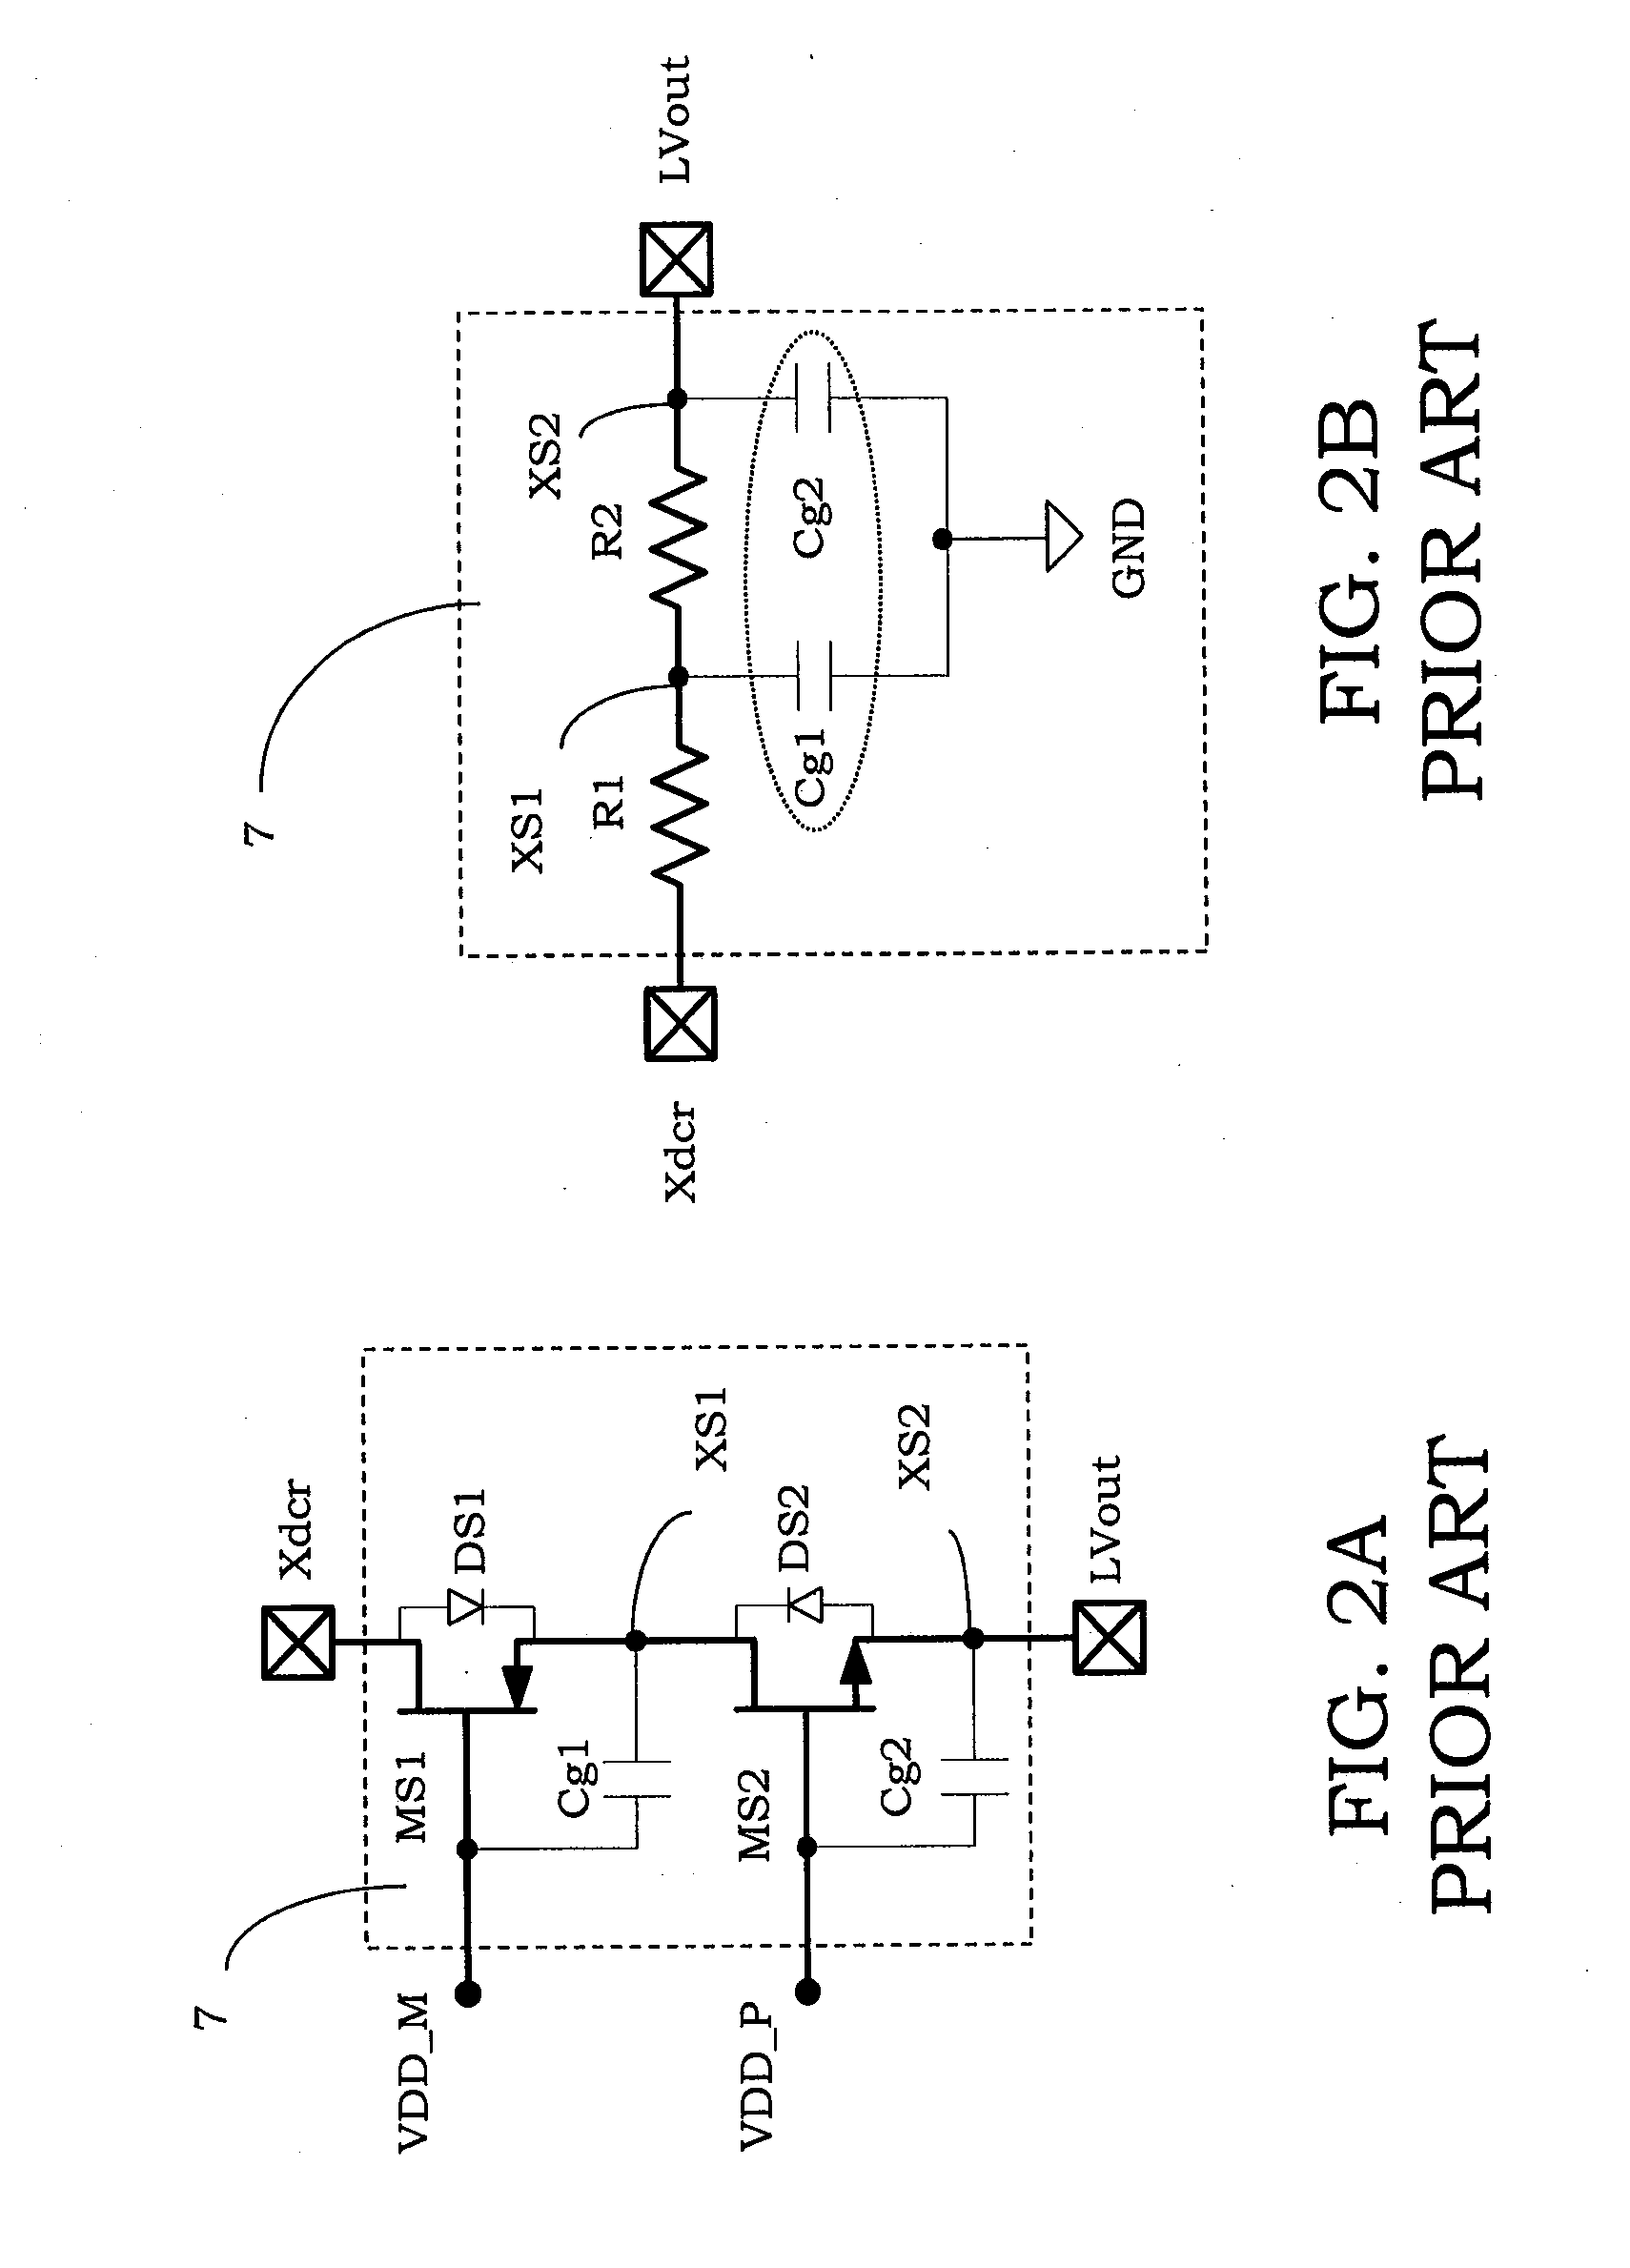 Low voltage isolation switch, in particular for a transmission channel for ultrasound applications